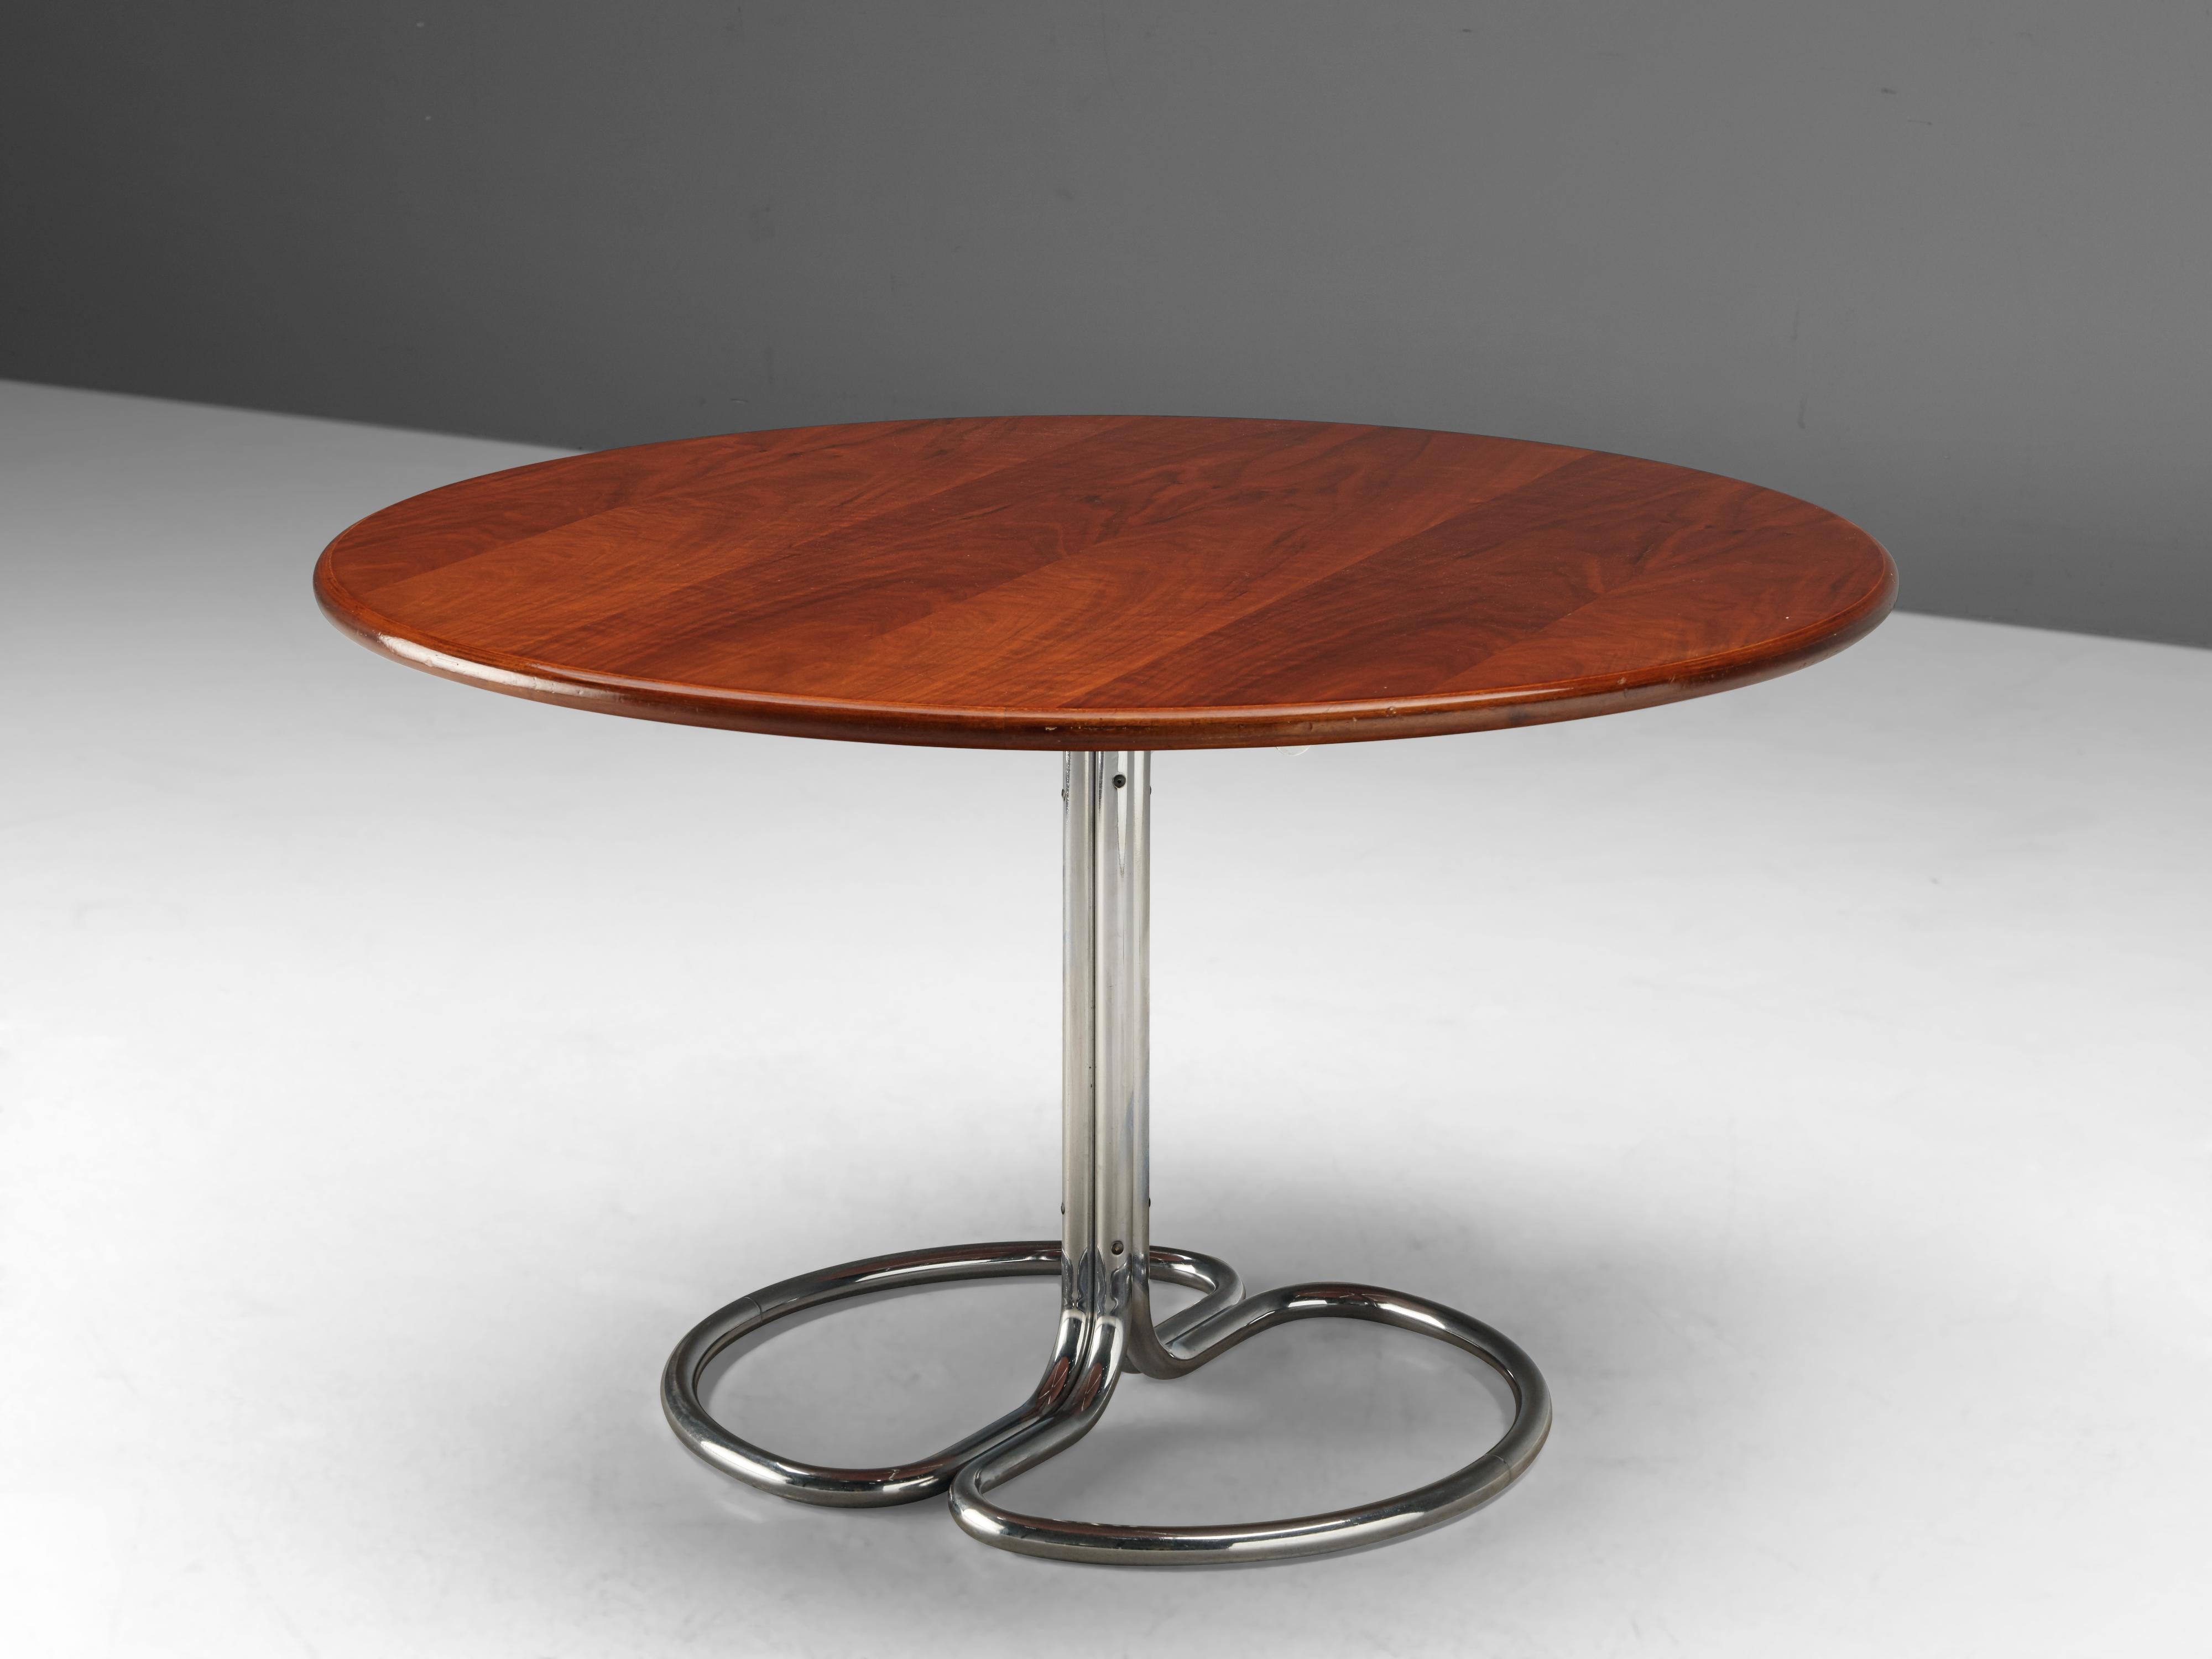 Giotto Stoppino for Bernini, 'Mayan' dining table, walnut and chromed metal, Italy, 1960s

Round dining table by Giotto Stoppino. The walnut tabletop shows a warm, honey colored grain. The top is supported by a four-part chromed base that consists